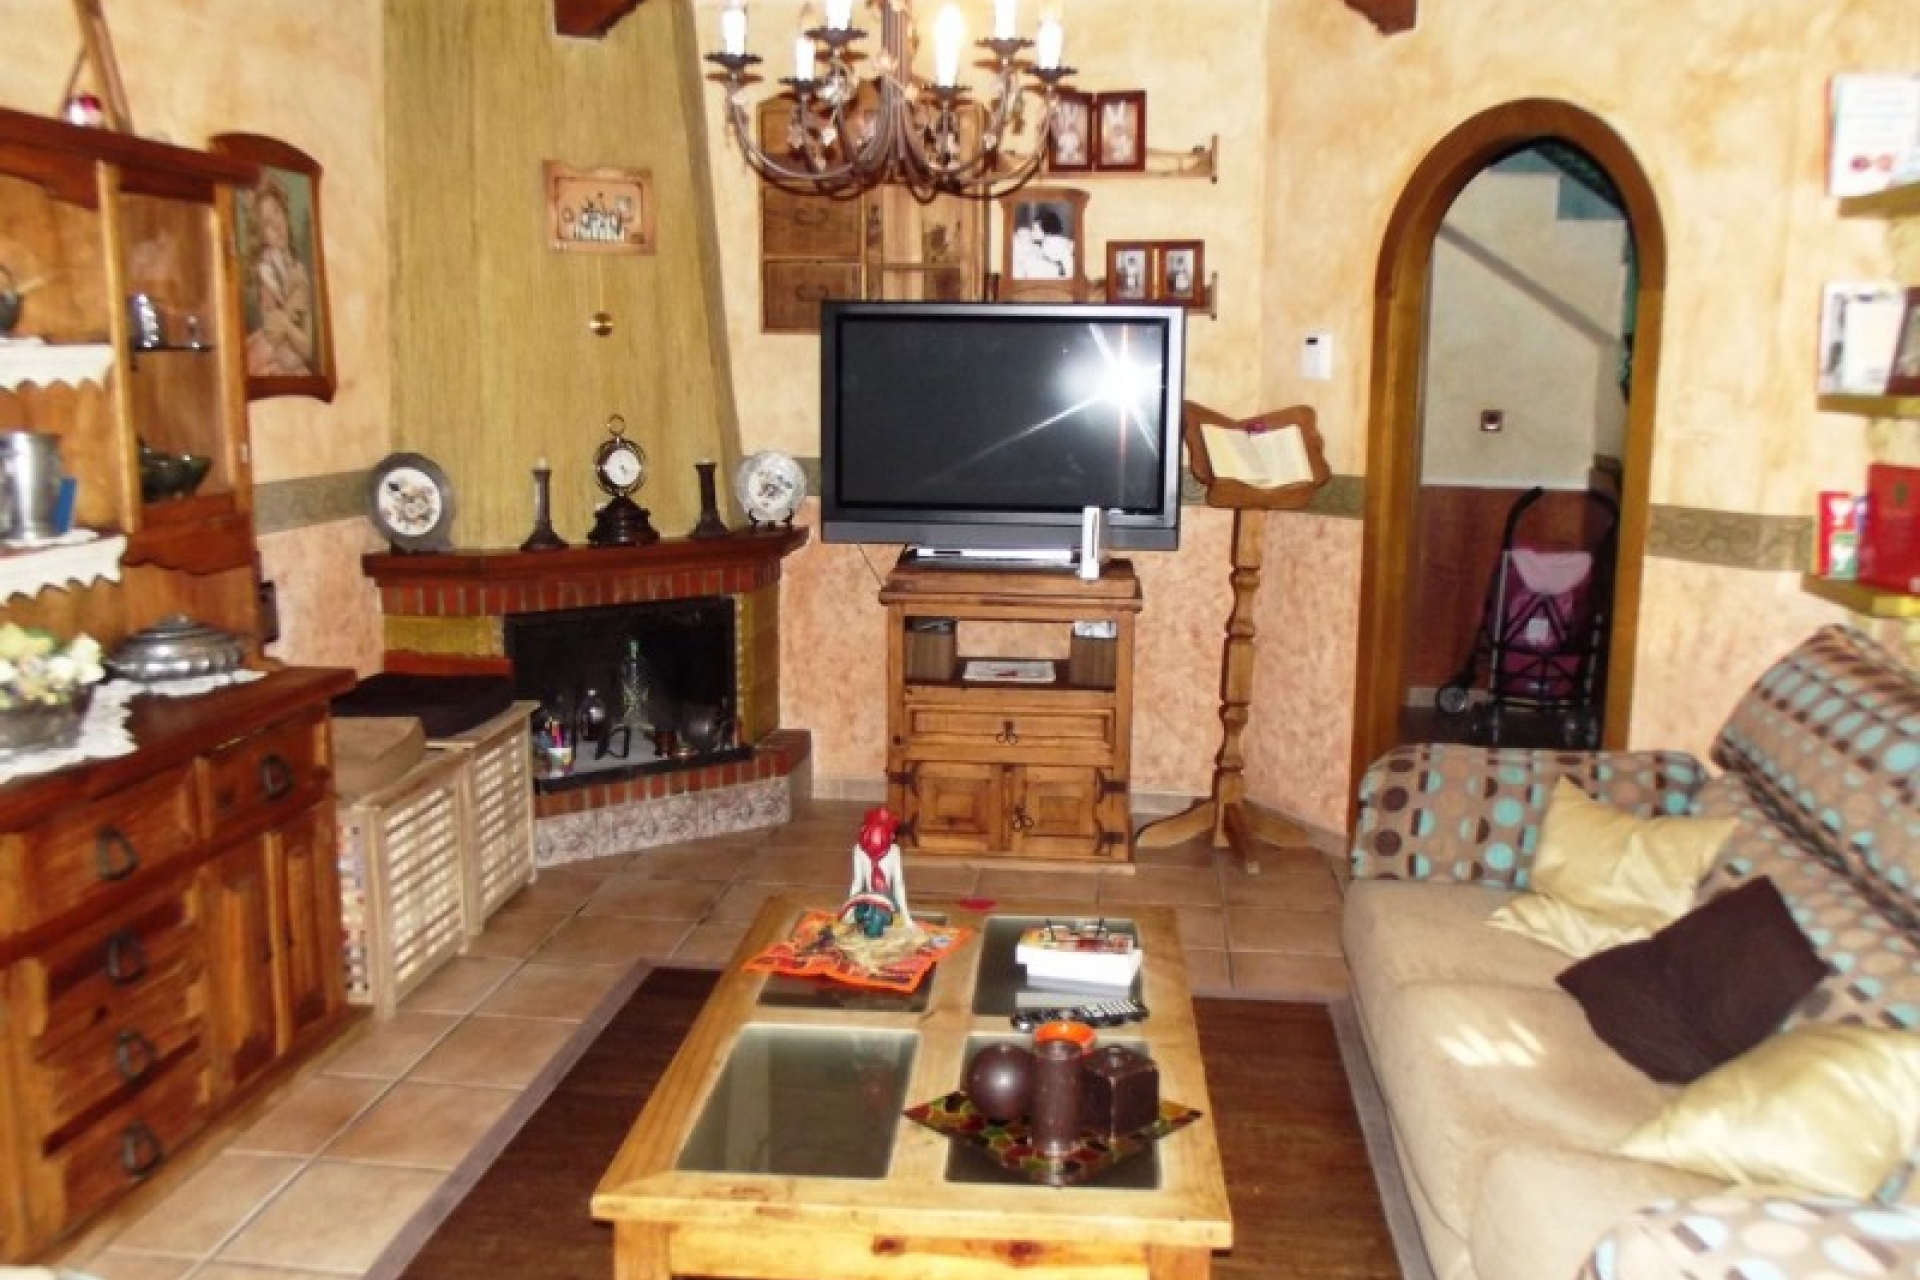 Costa Blanca property for sale, Spain, near Torrevieja and La Siesta, cheap bargain property for sale in Los Montesinos